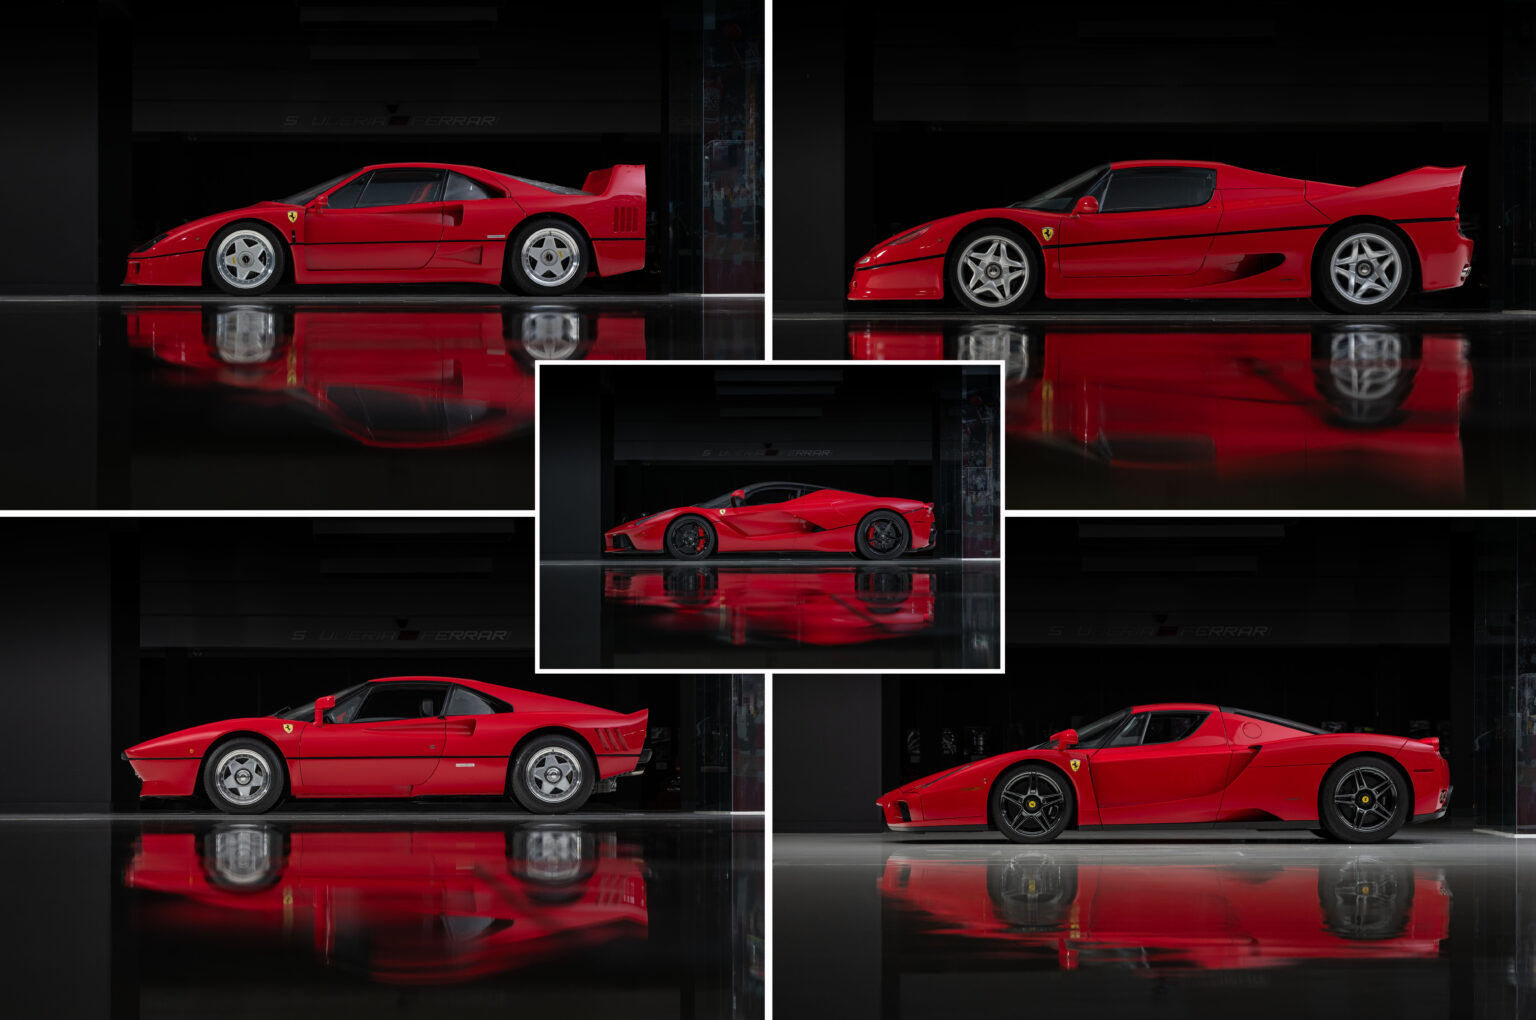 the iconic 'Big 5' Ferraris hitting the auction block, including legends like the 288 GTO and the F40. With celebrities and racing legends among previous owners, these rare gems are set to fetch millions at the RM Sotheby’s event.